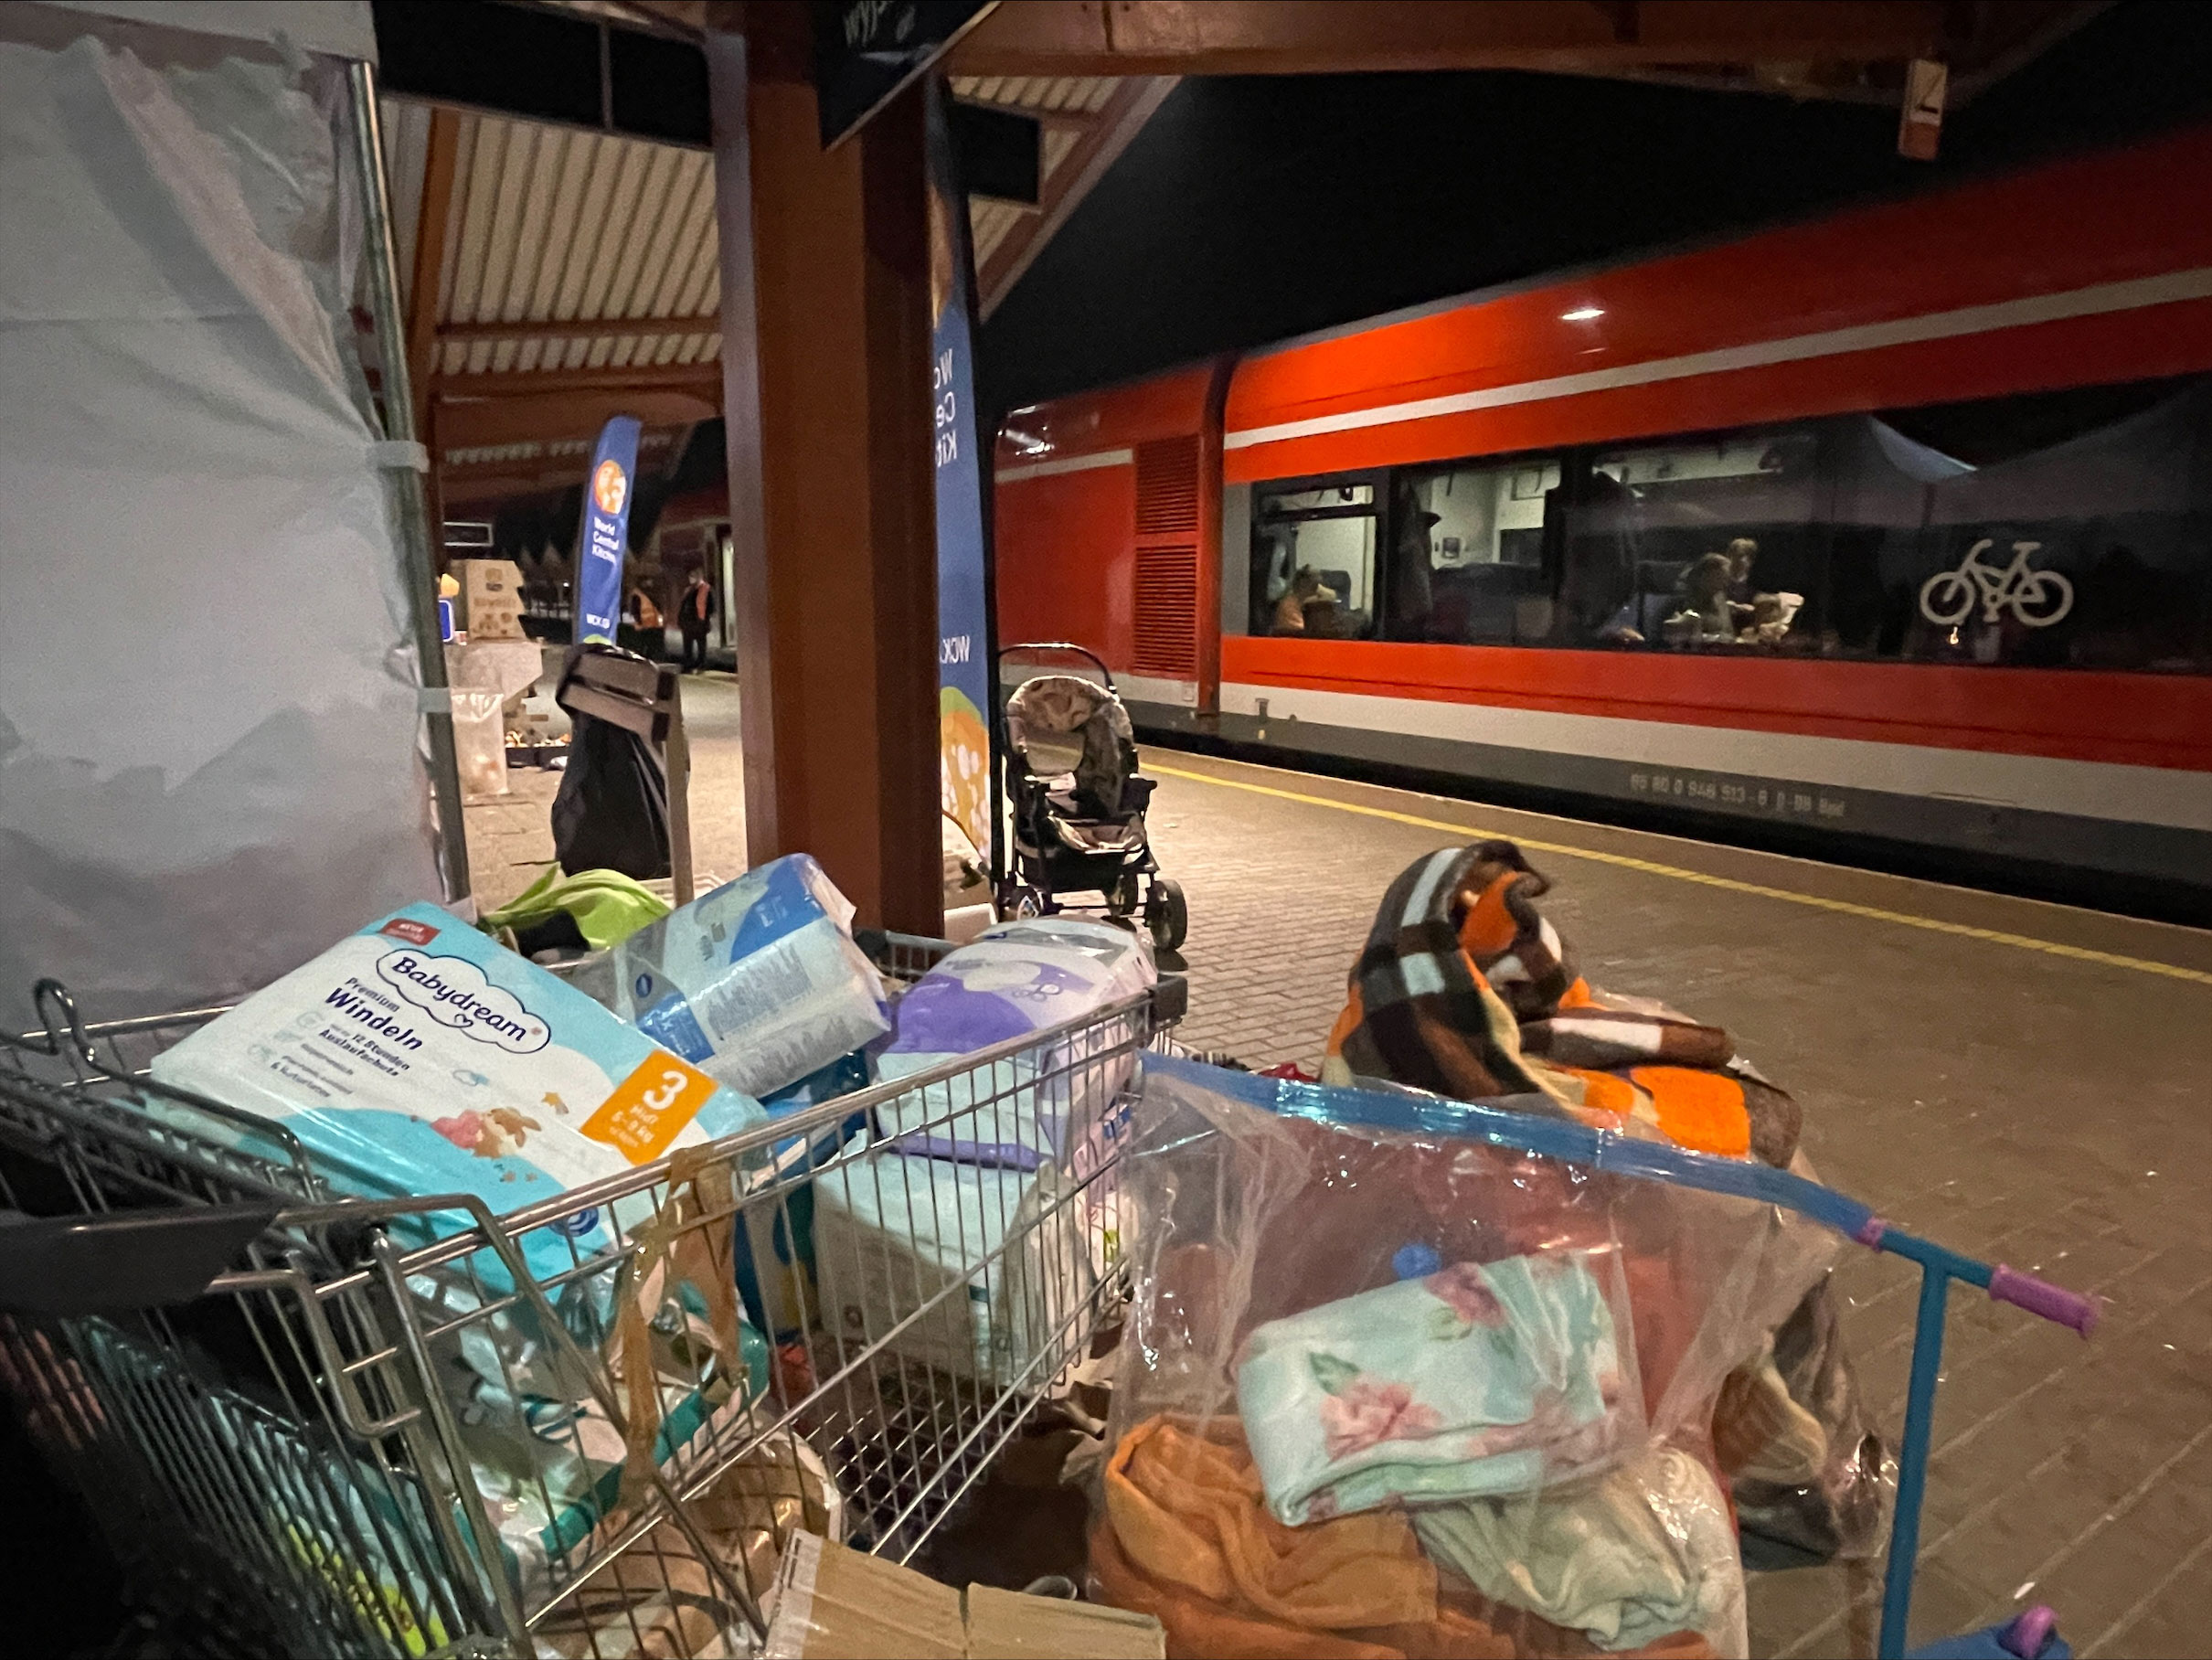 Polish citizens left shopping carts filled with diapers at the Przemyśl train station platform.